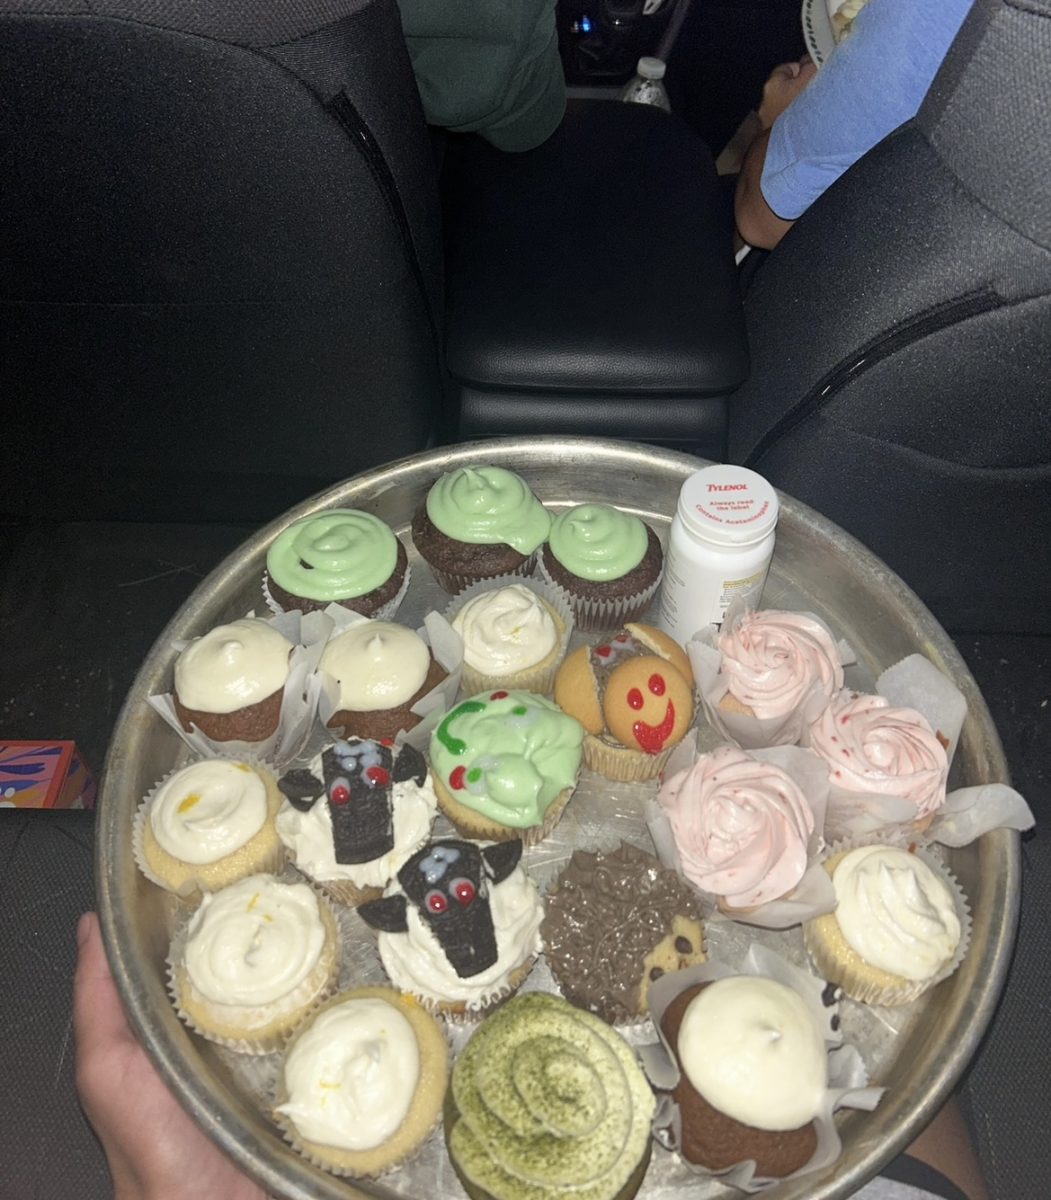 A tray of homemade cupcakes of different flavors, including pumpkin. Photo credit to: Khushi Mehta